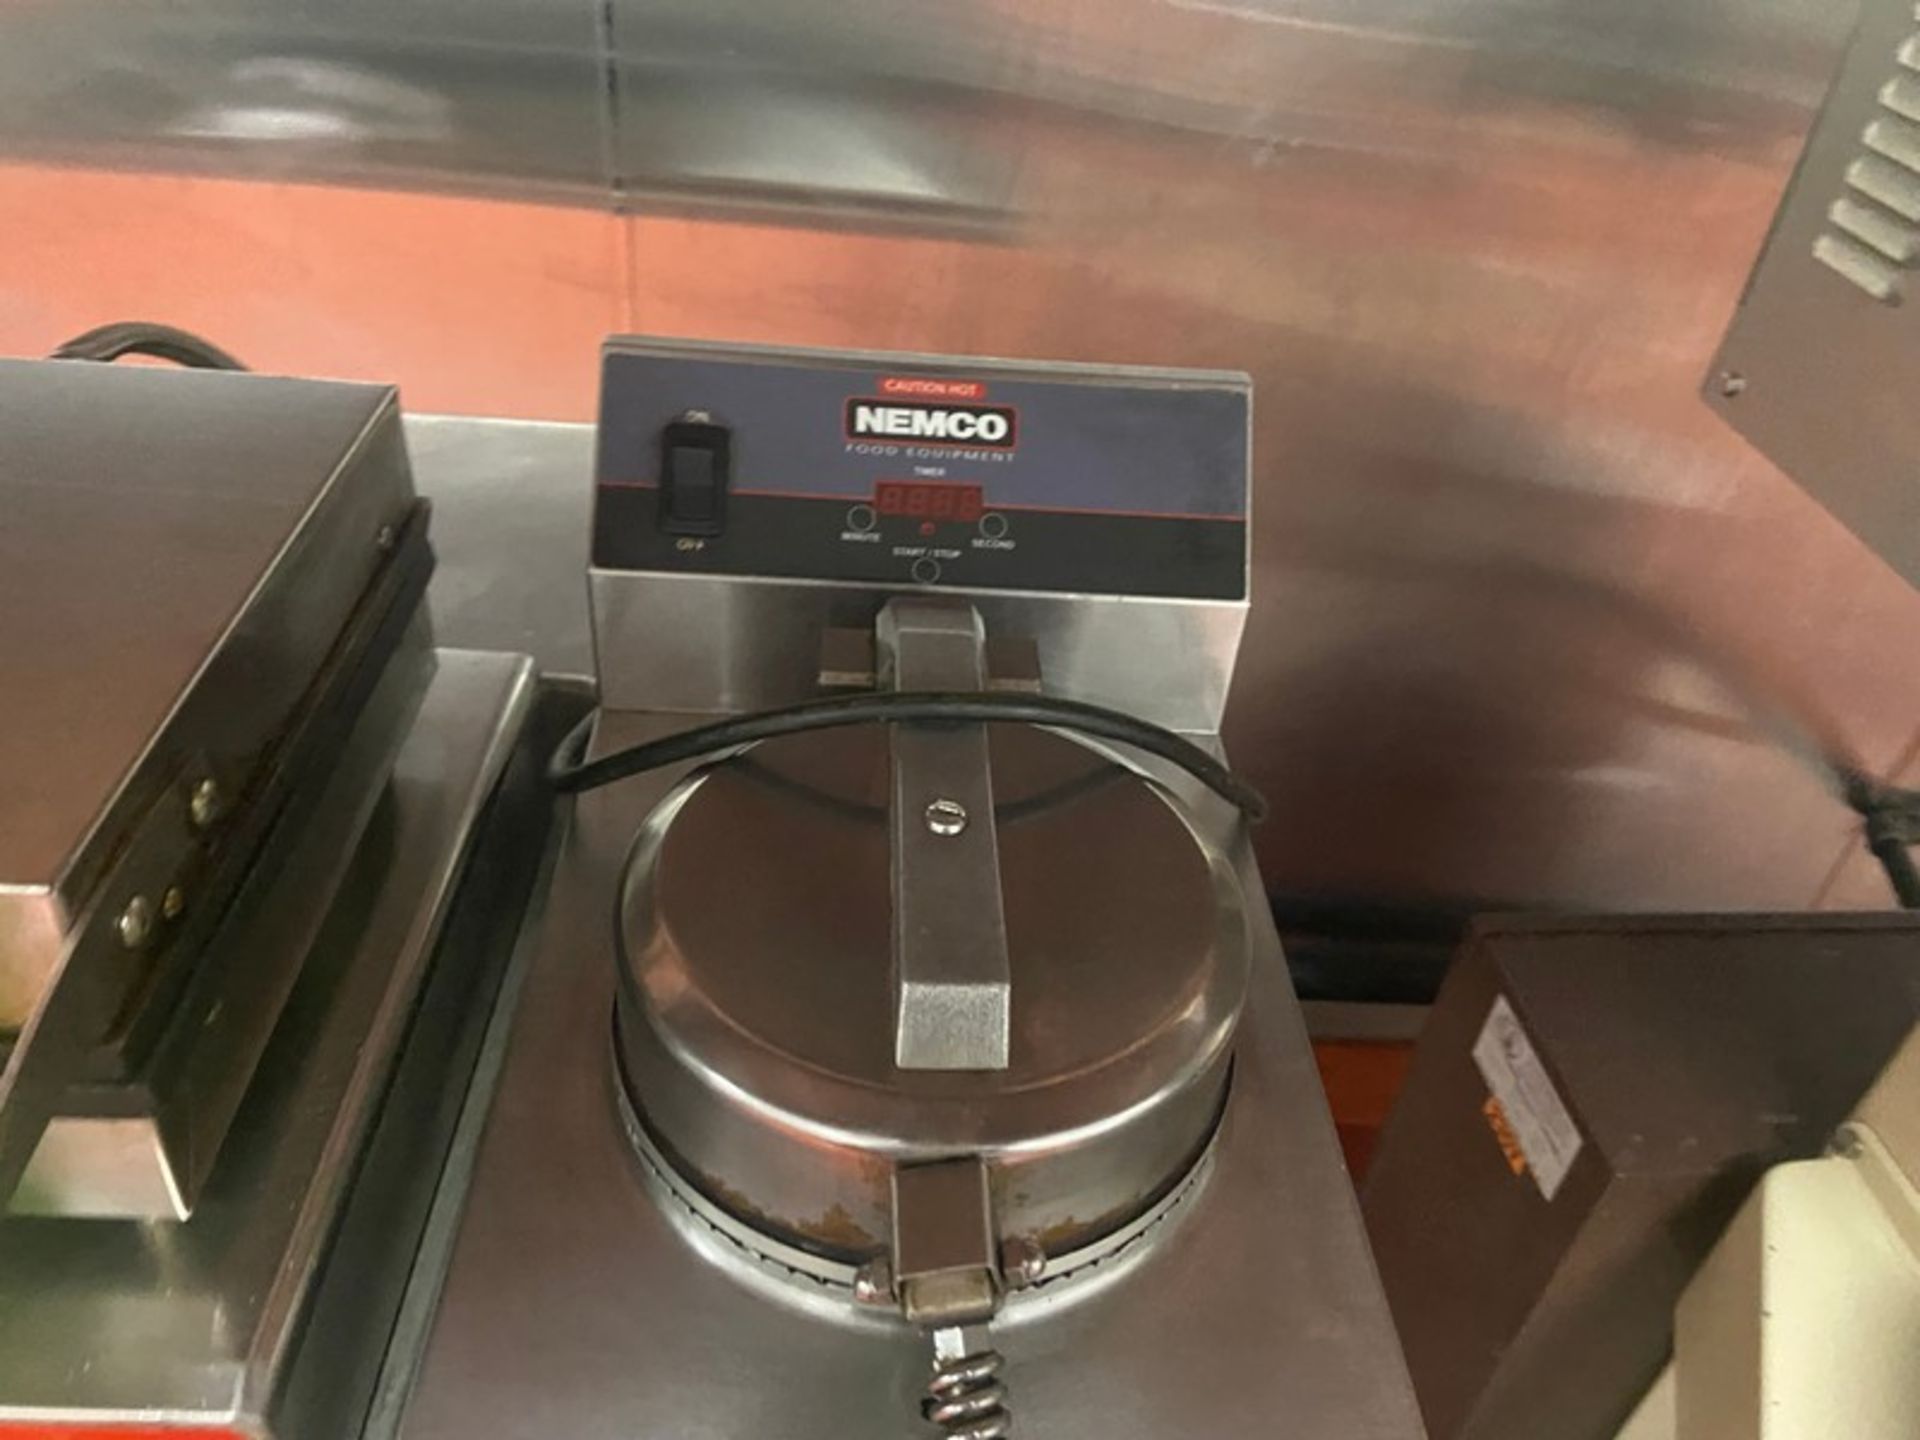 Nemco Bench Top S/S Round Waffle Maker, 110 Volts, 1 Phase (LOCATED IN RED HOOK BROOKLYN, N.Y.) - Image 2 of 3